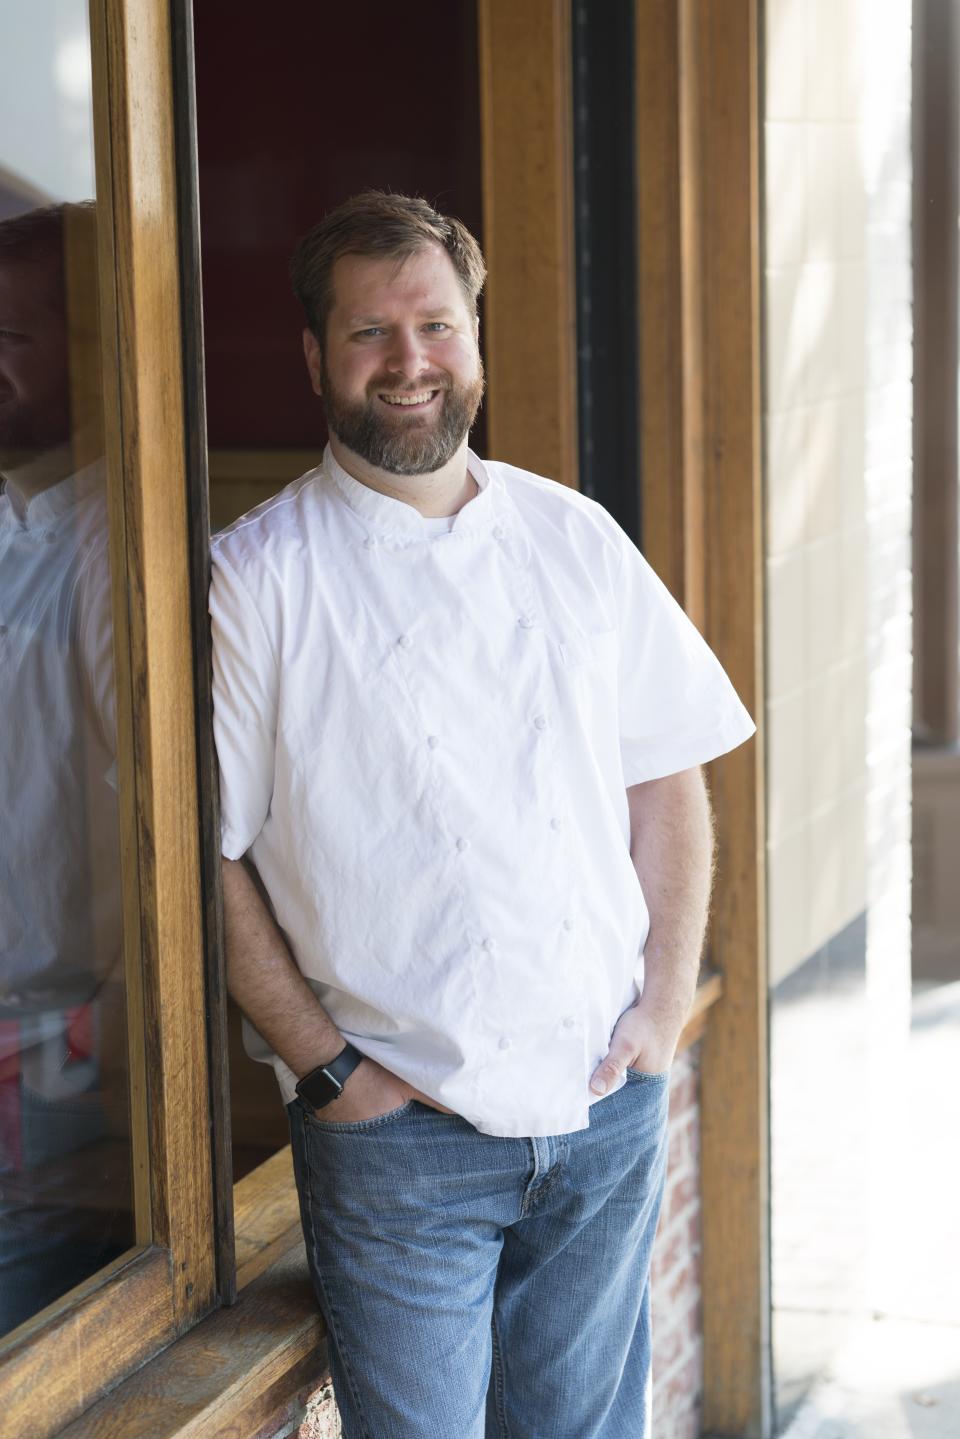 Executive Chef Mike McCarty is now the full owner of The Lobster Trap restaurant in downtown Asheville.